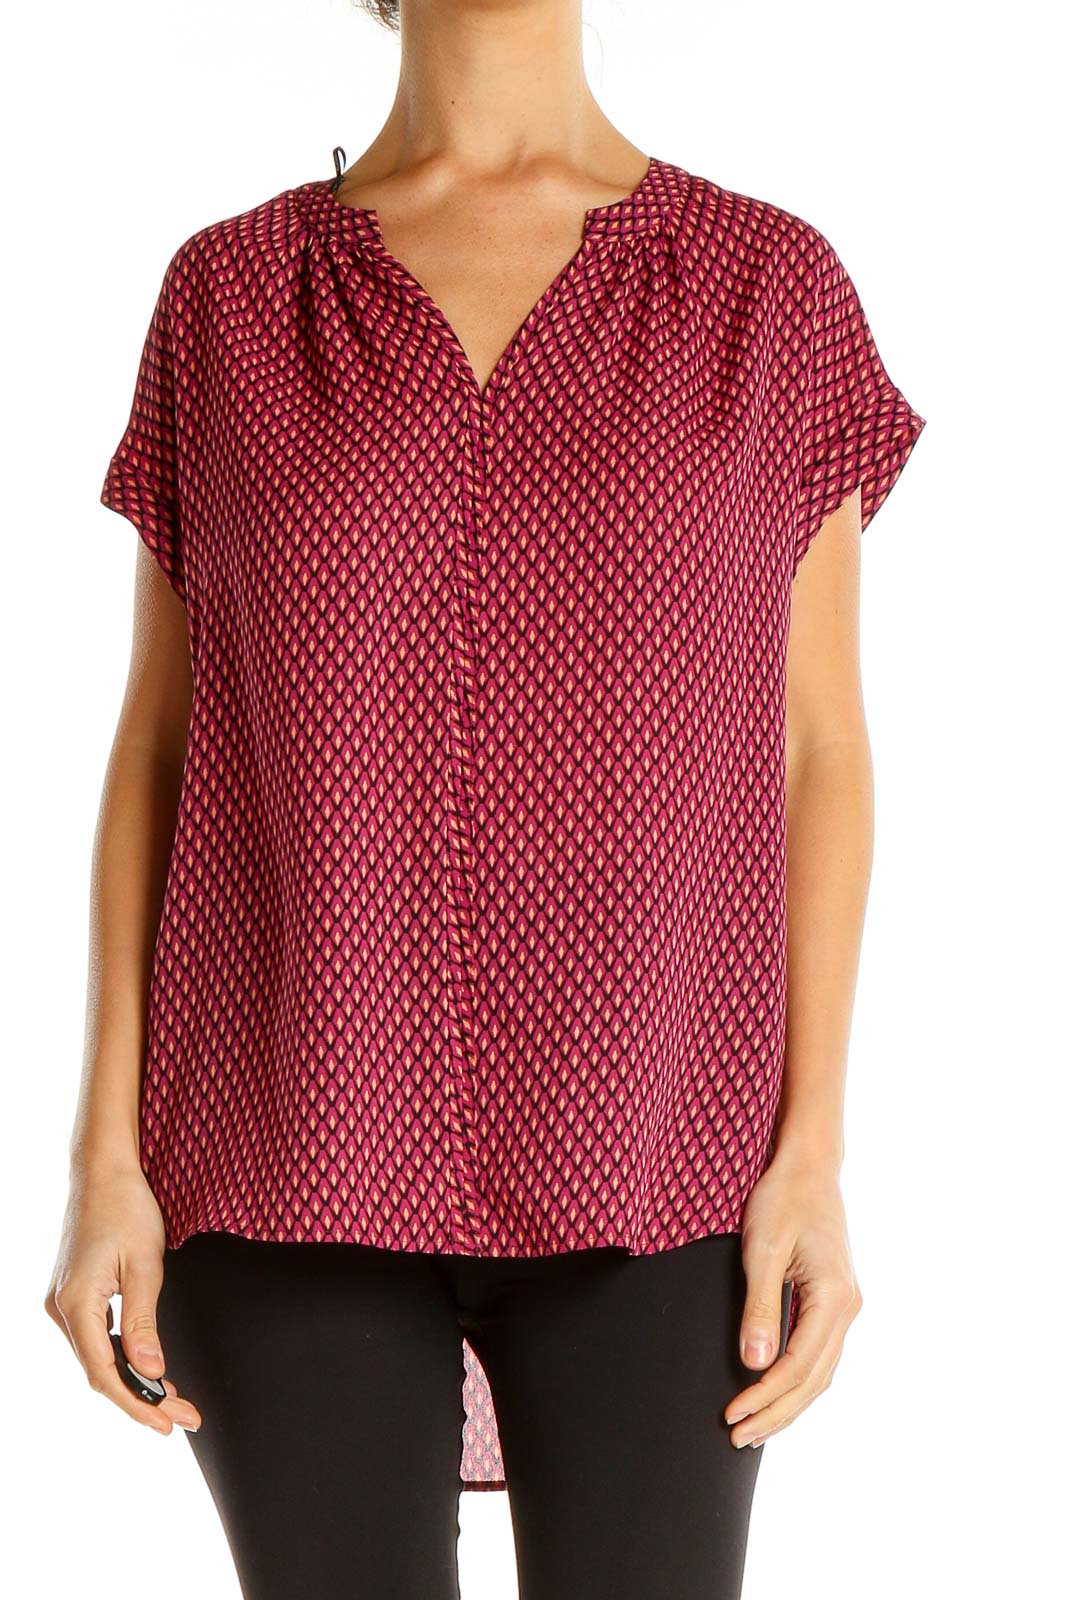 Red Printed Top Front